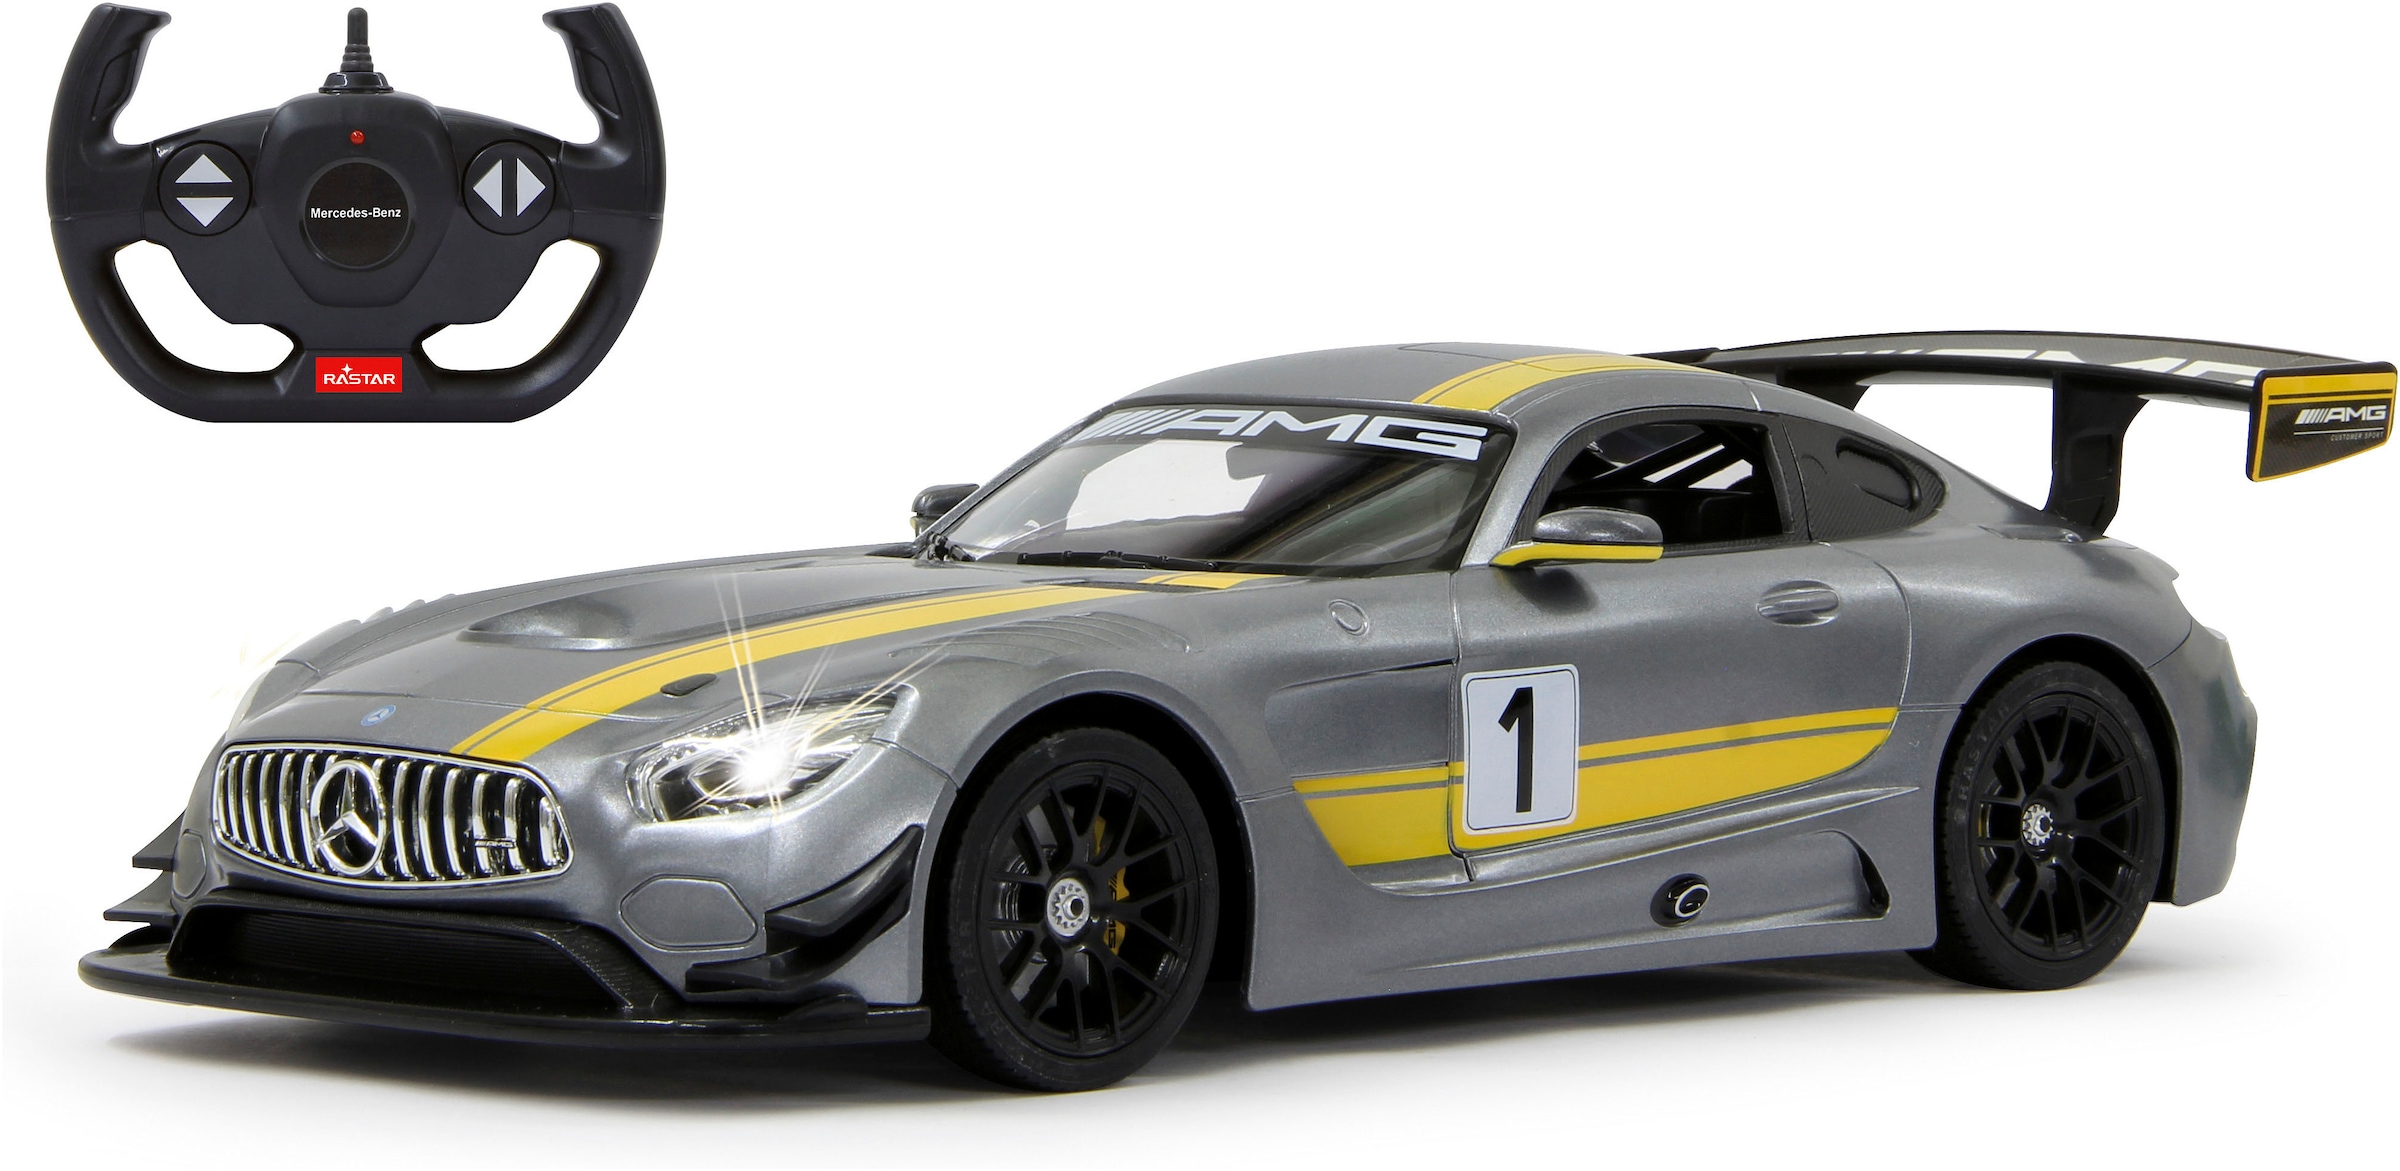 RC-Auto »Deluxe Cars, Mercedes-AMG GT3 Performance, 1:14, grau, 2,4GHz«, mit LED-Licht